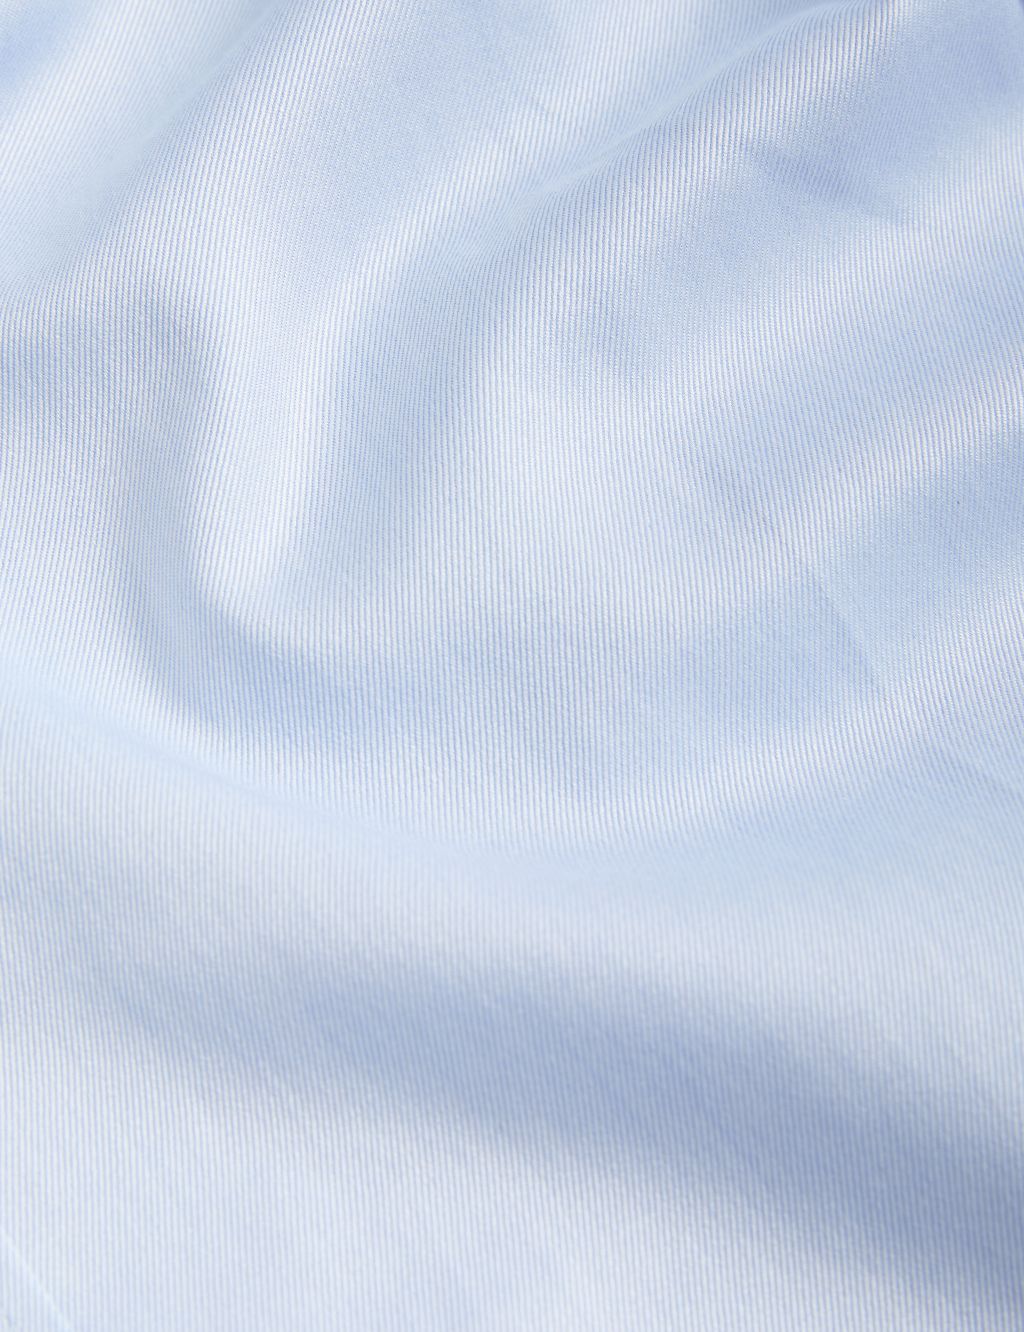 Tailored Fit Pure Cotton Twill Shirt image 6